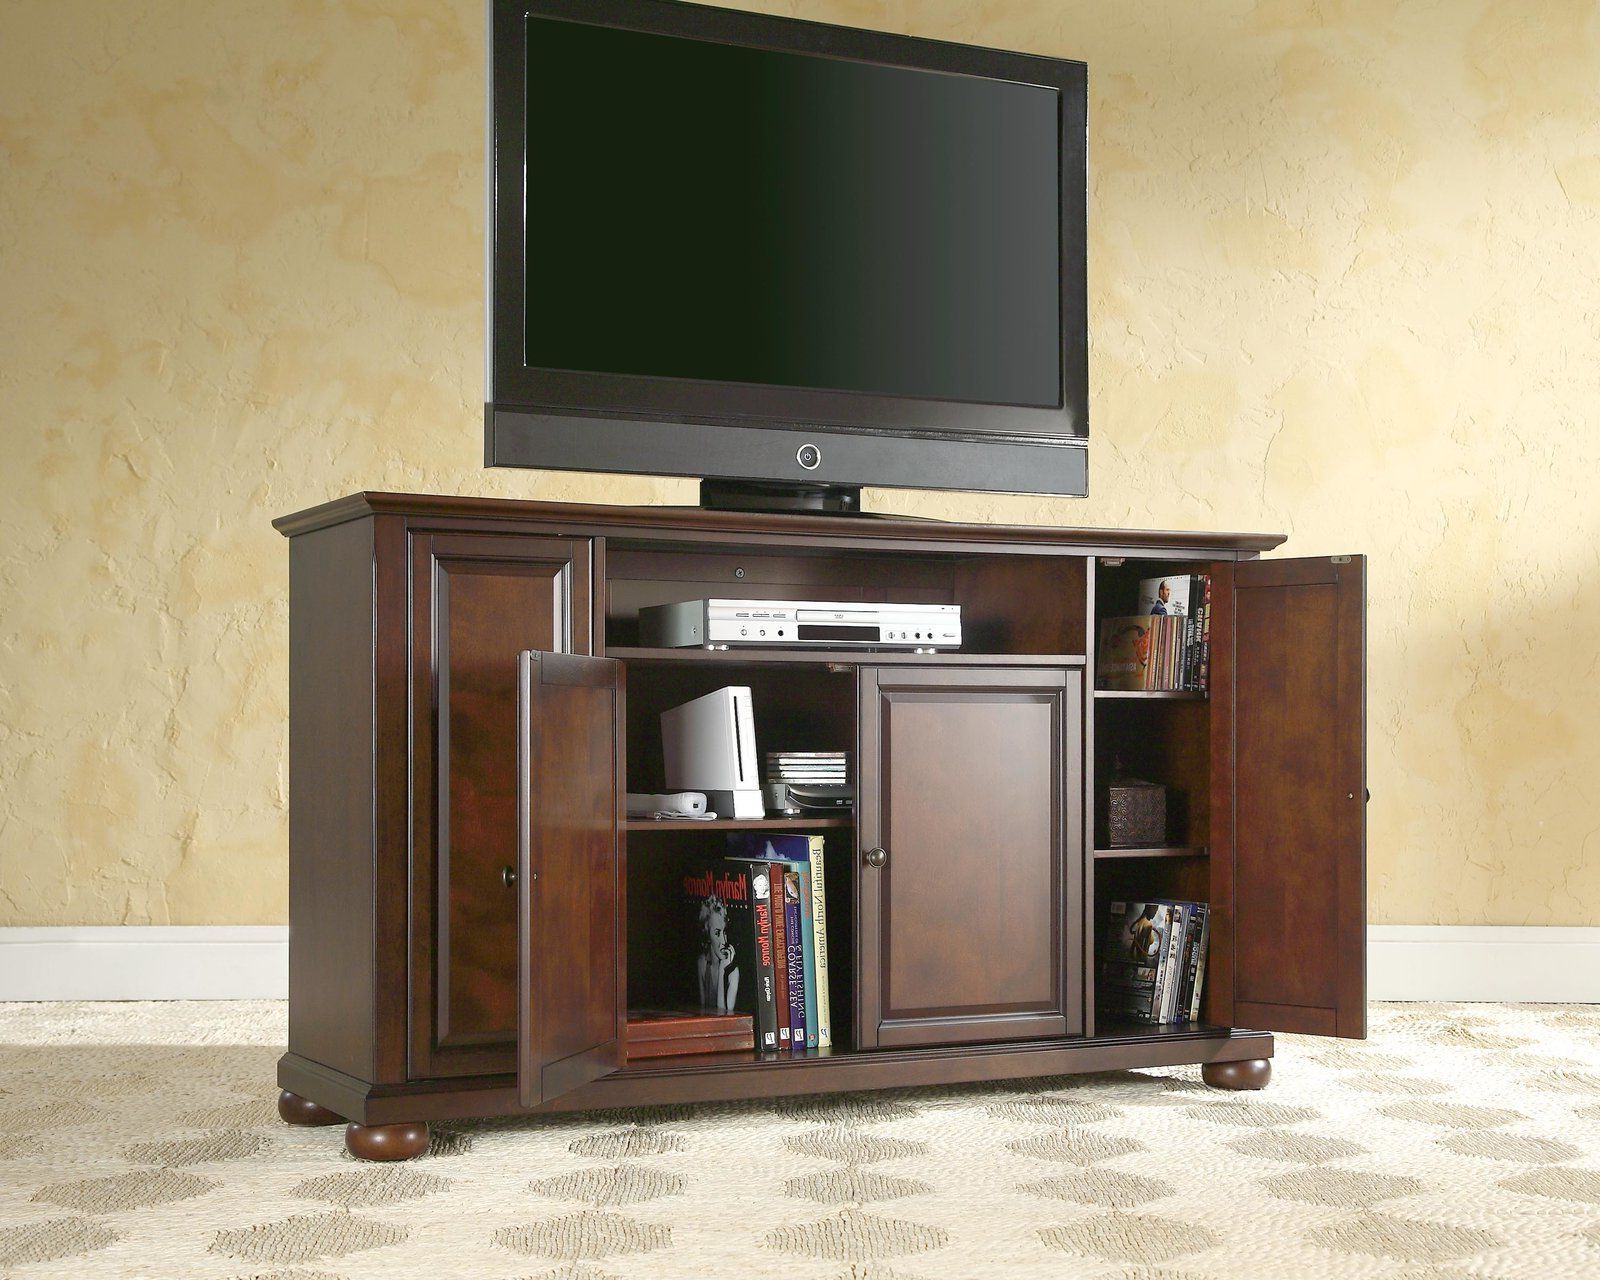 Morris Tv Stand For Tvs Up To 60" (with Images) (View 2 of 10)